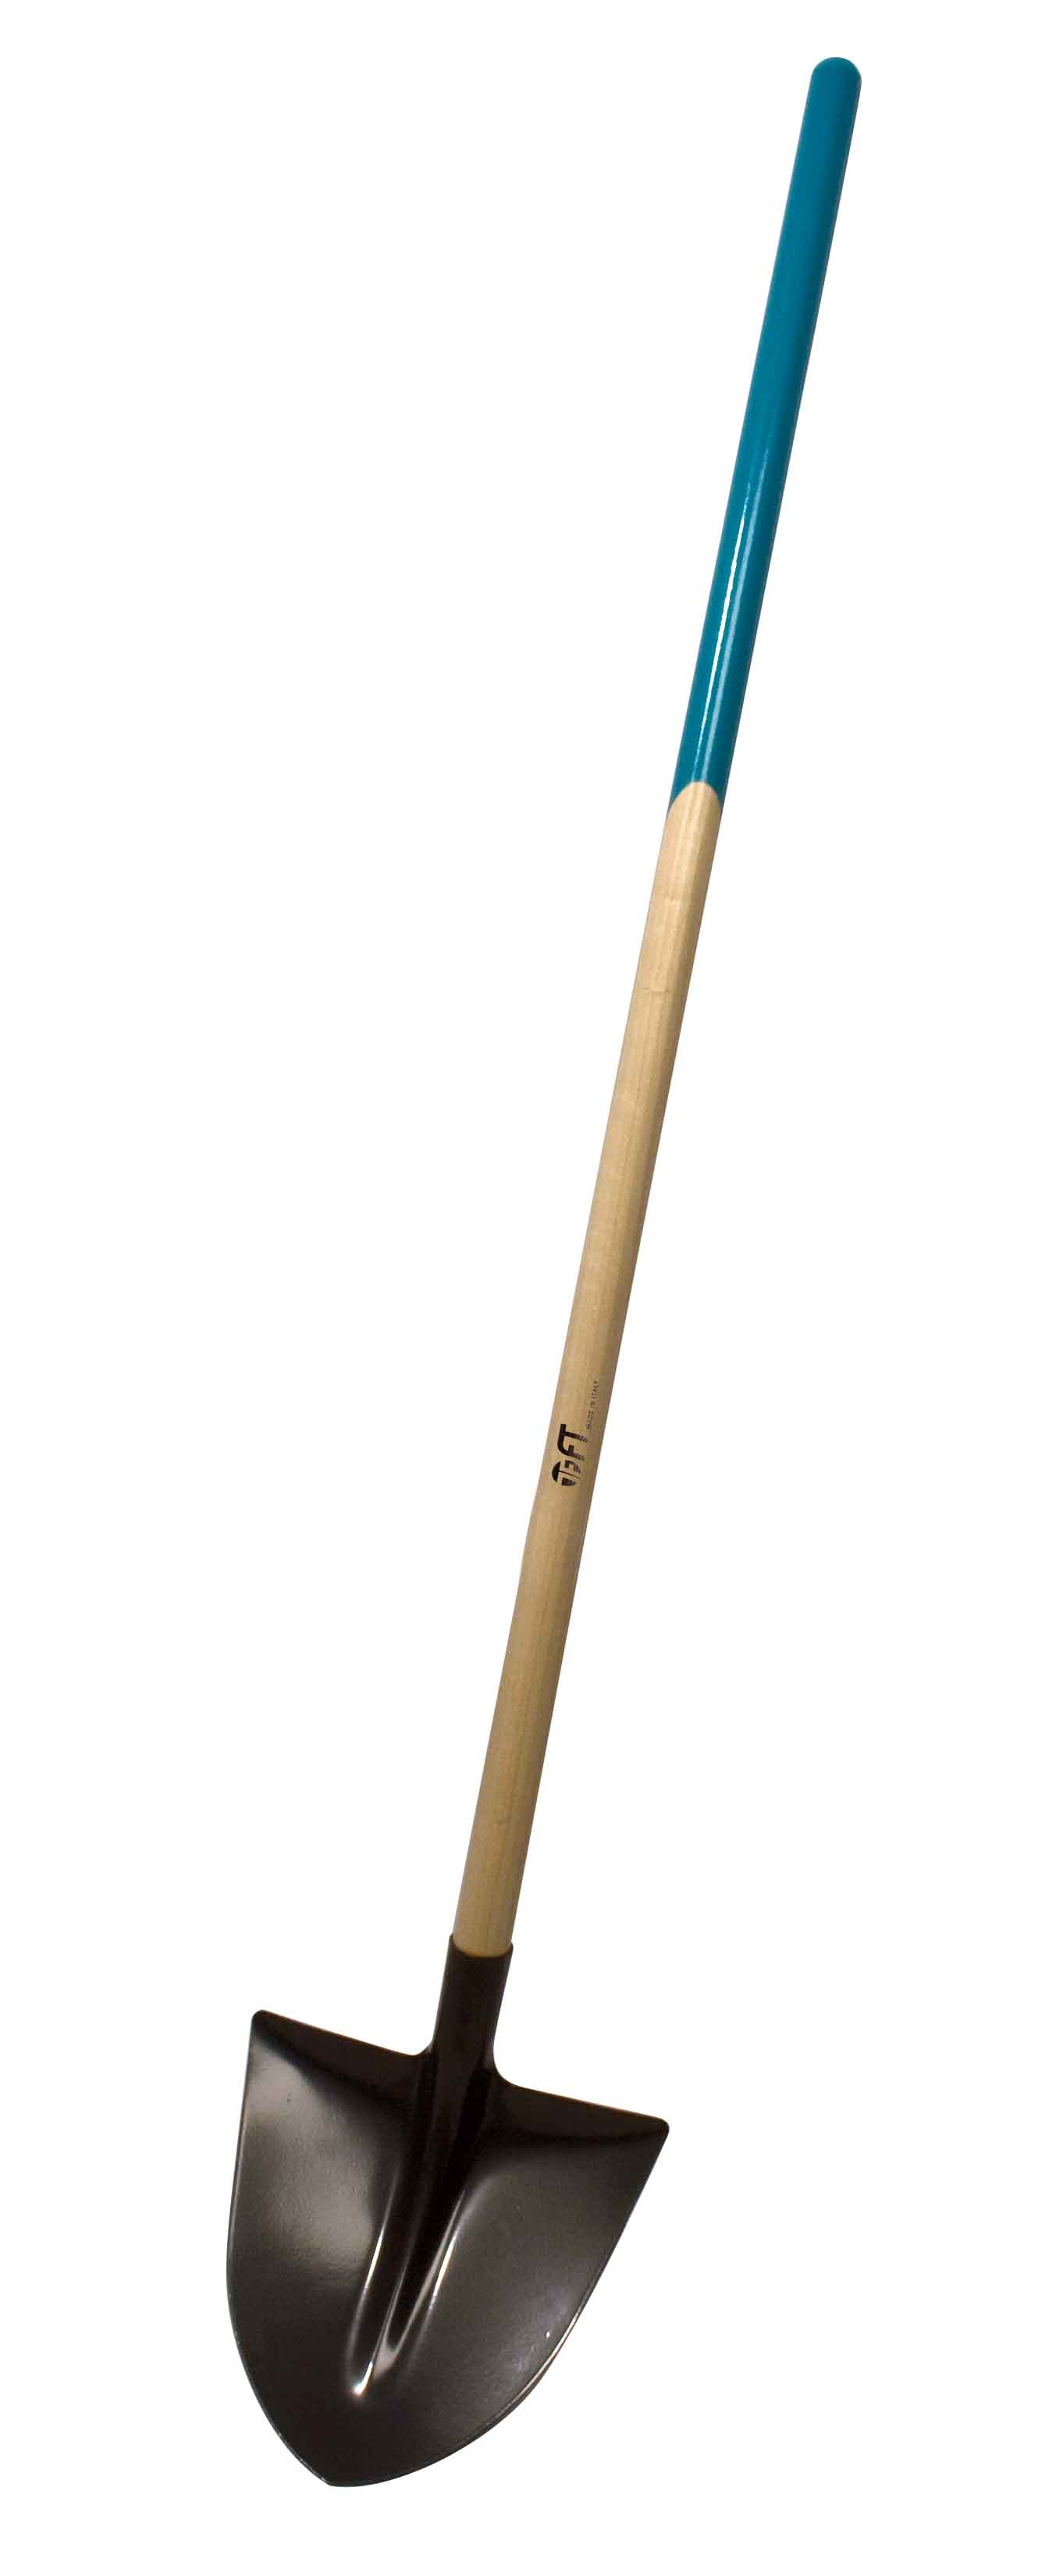 POINTED TIP “PACO” SHOVEL + HANDLE